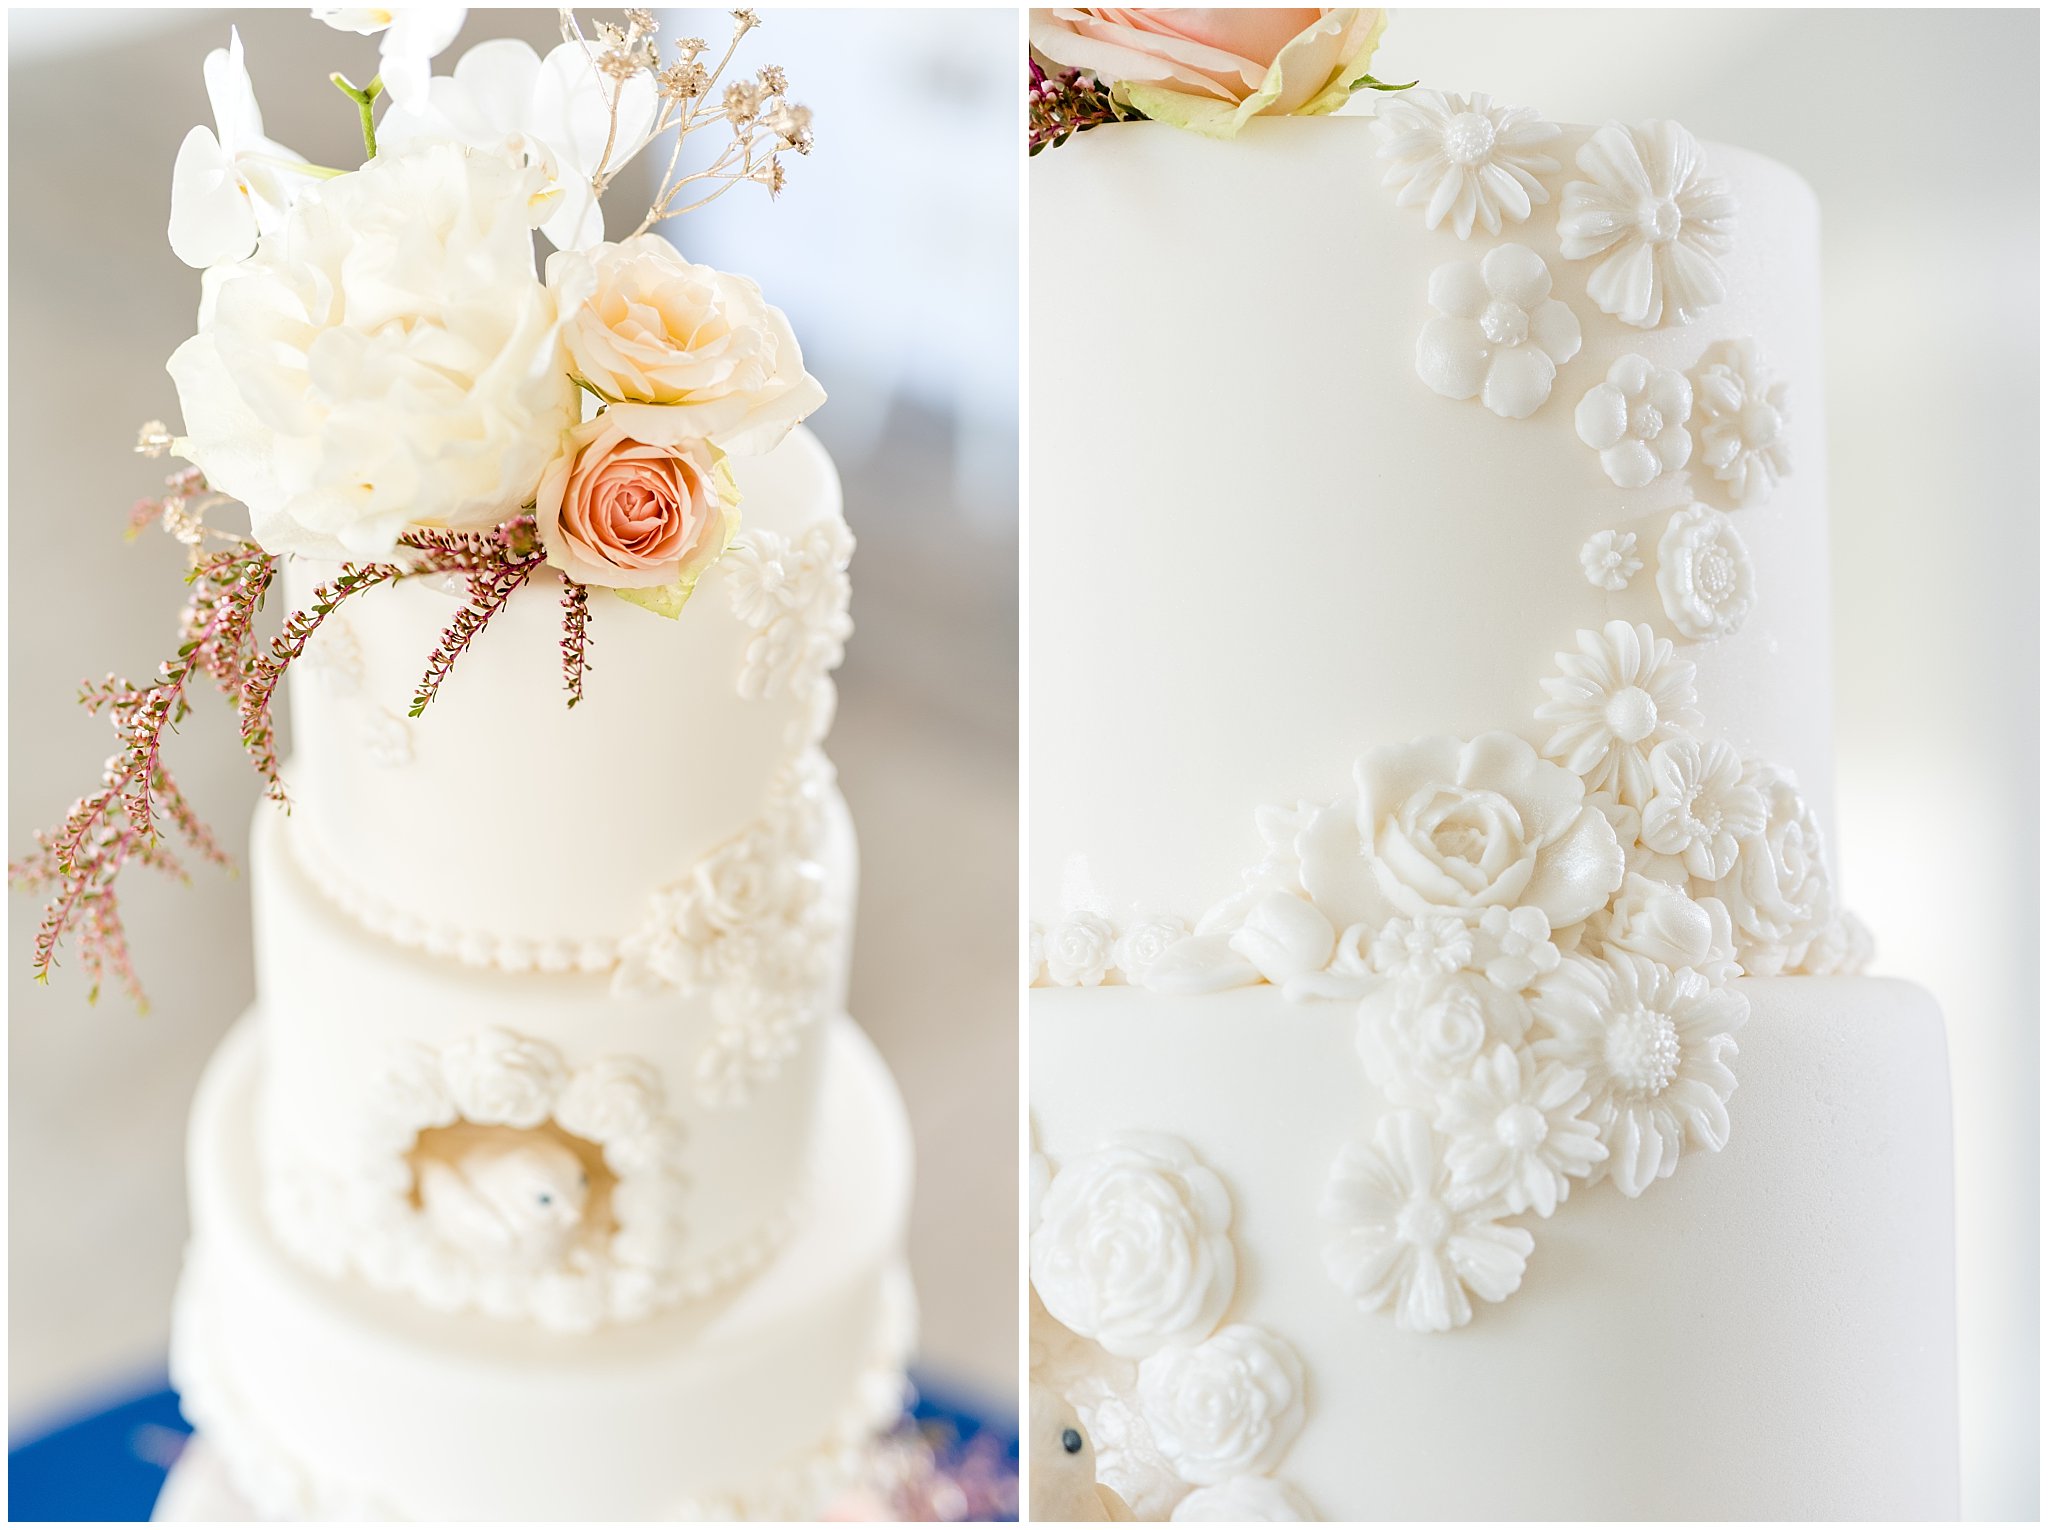 Eight tier white elegant wedding cake | gold, navy and white wedding | Detail of birds and flowers | Talia Event Center